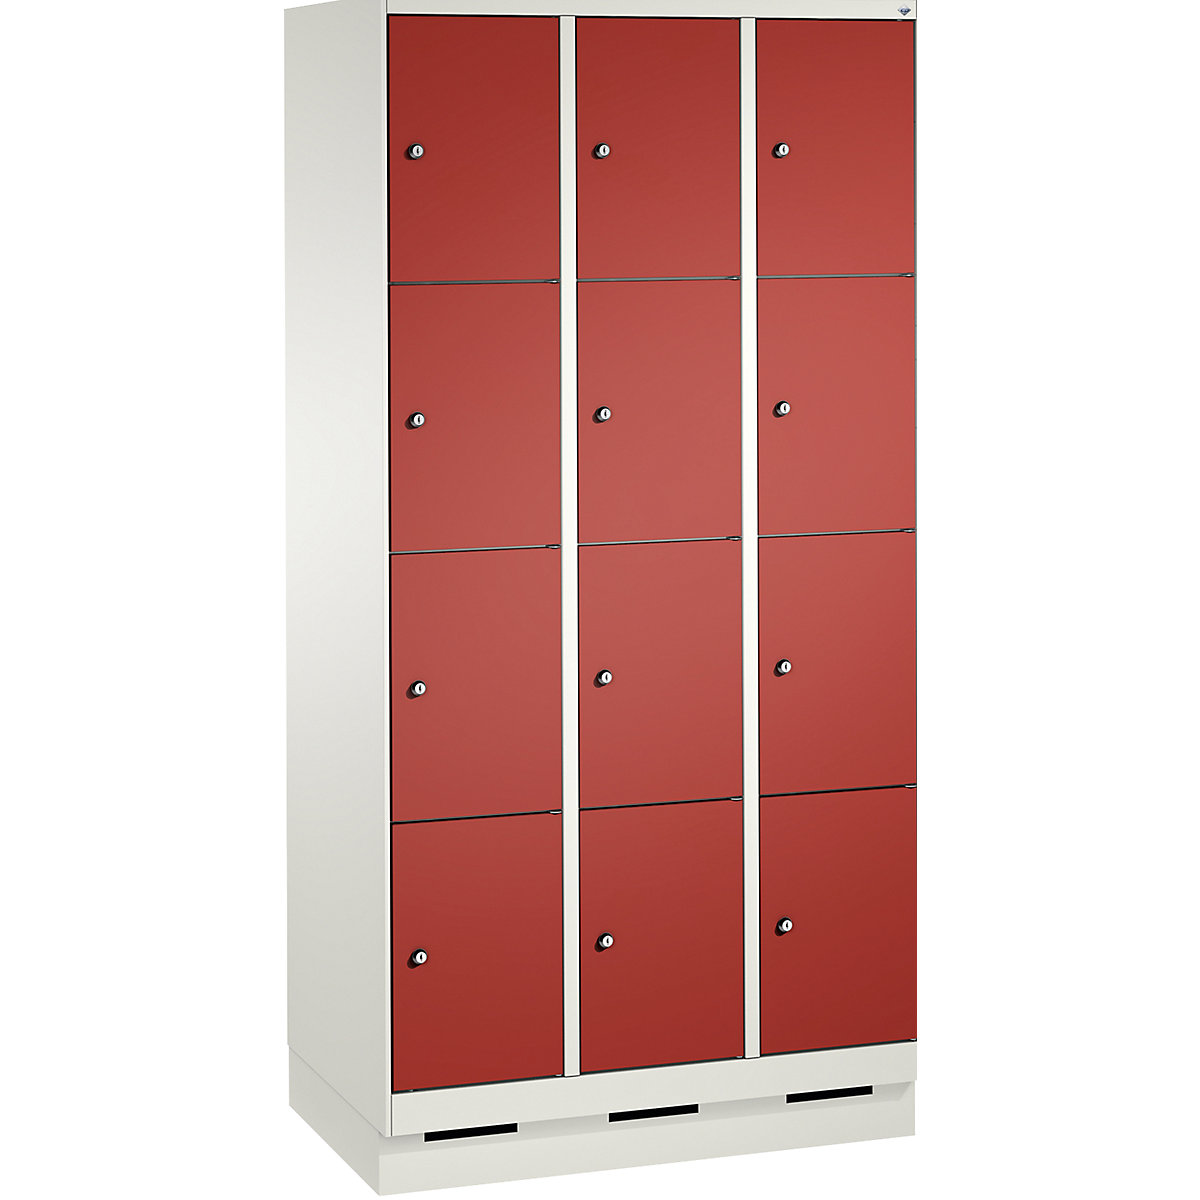 EVOLO locker unit, with plinth – C+P, 3 compartments, 4 shelf compartments each, compartment width 300 mm, traffic white / flame red-6